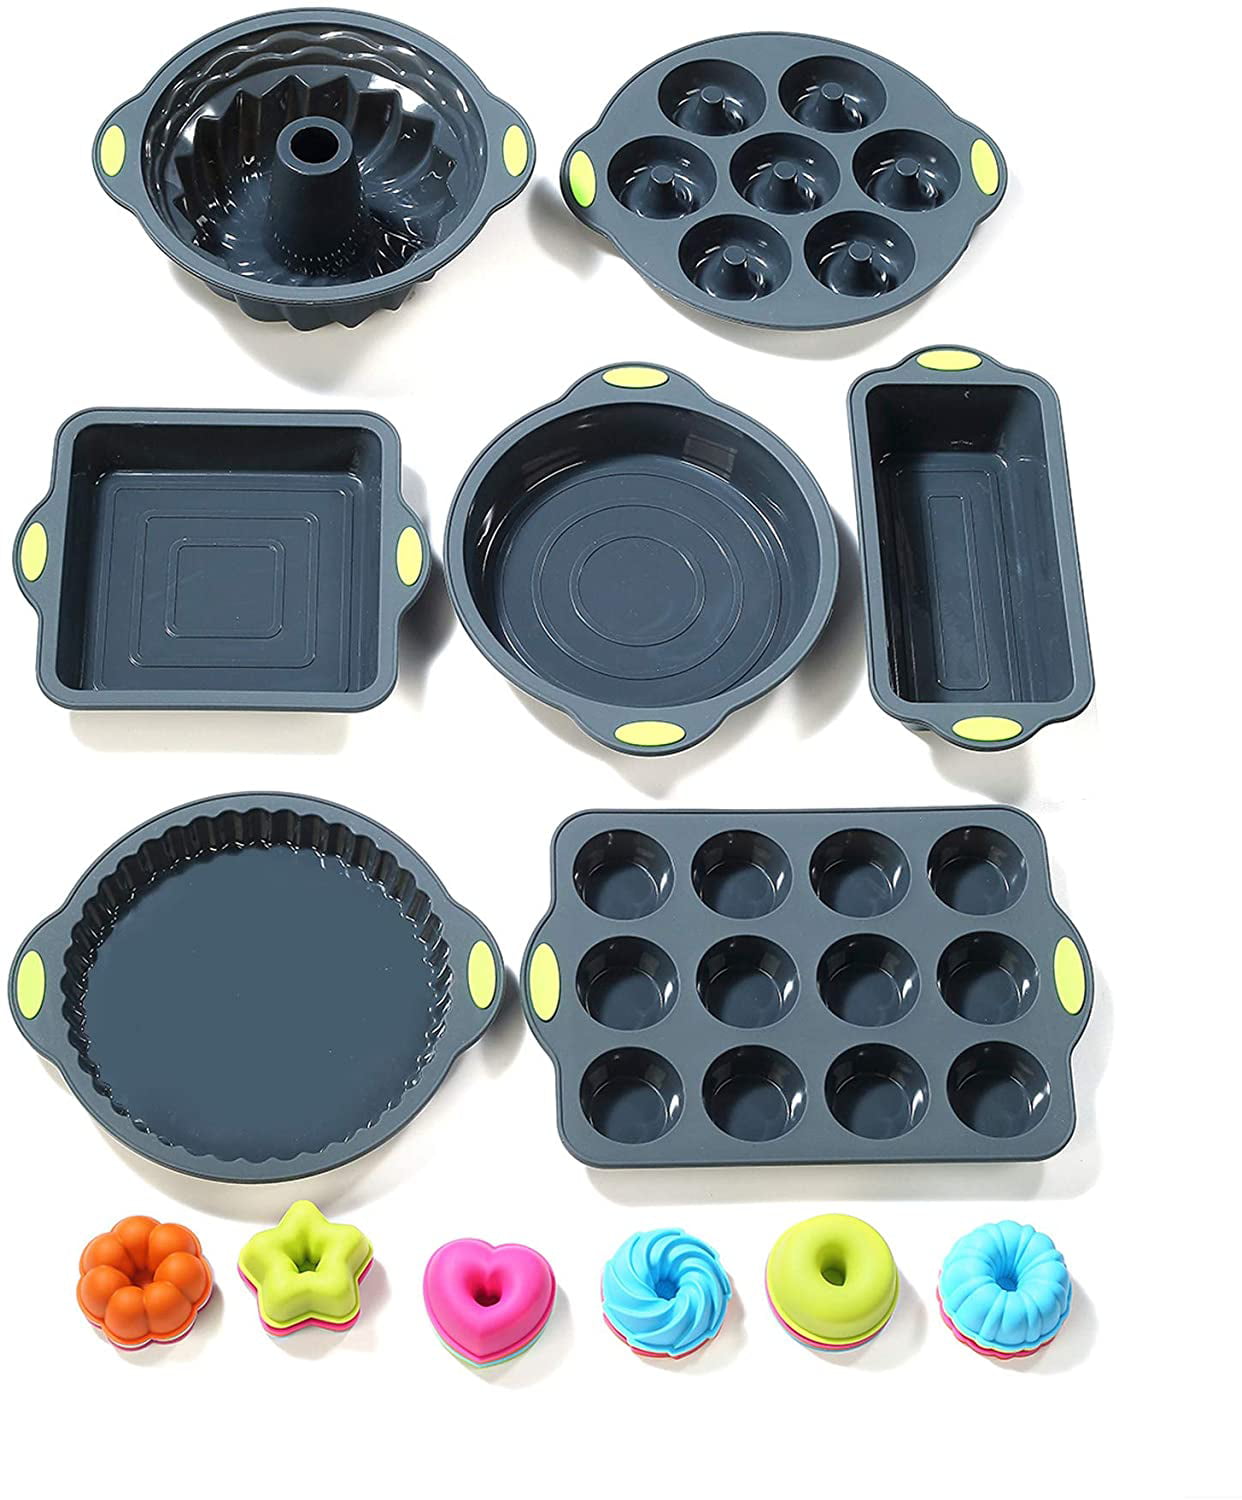 To encounter 31 Pieces Silicone Bakeware Set - 7 Silicone Baking Cake Pans  - 24 Silicone Cake Molds Non Stick Muffin Cups Liners with Metal Reinforced  